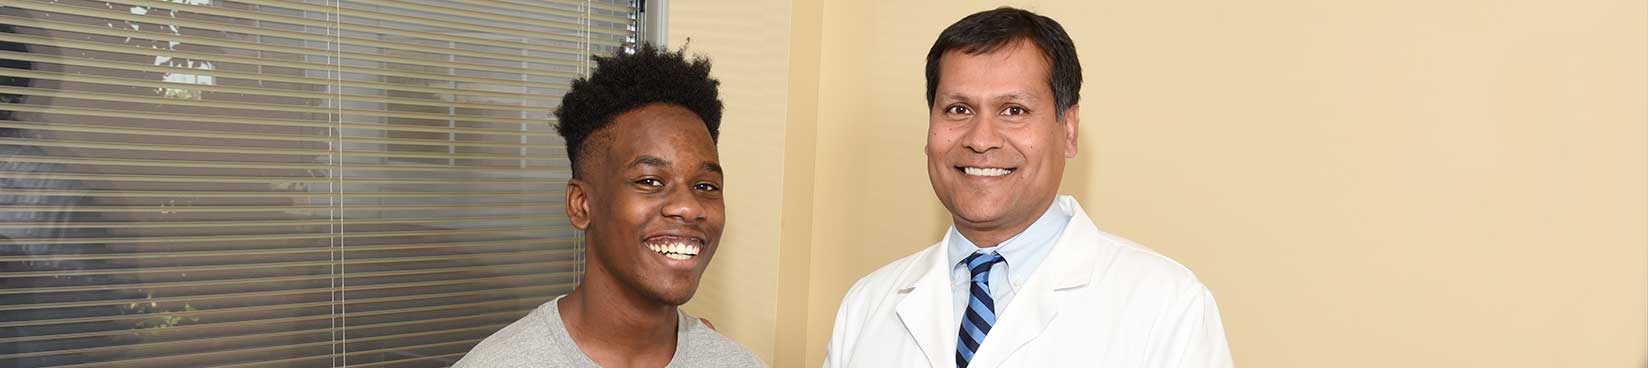 Image of Dr Kushwaha with Scoliosis Patient Breelon Bullock